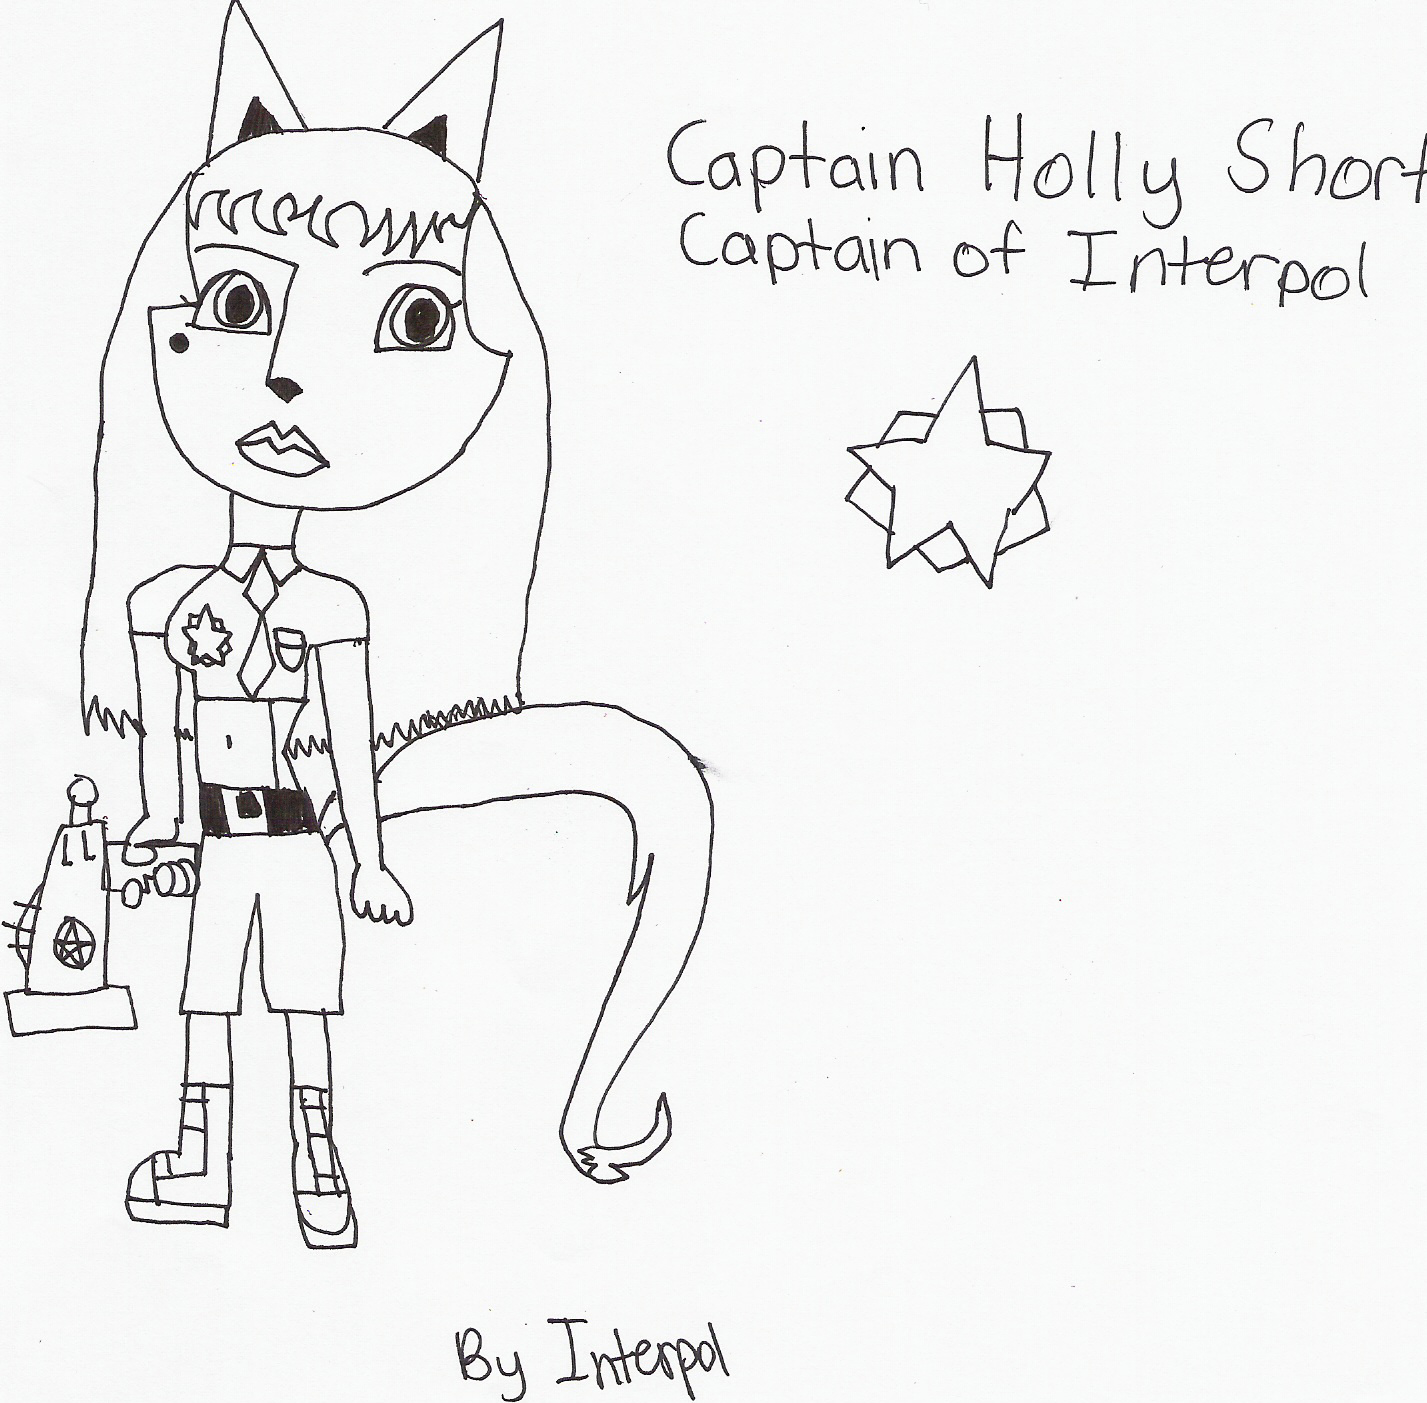 Captain Holly Short by Interpol